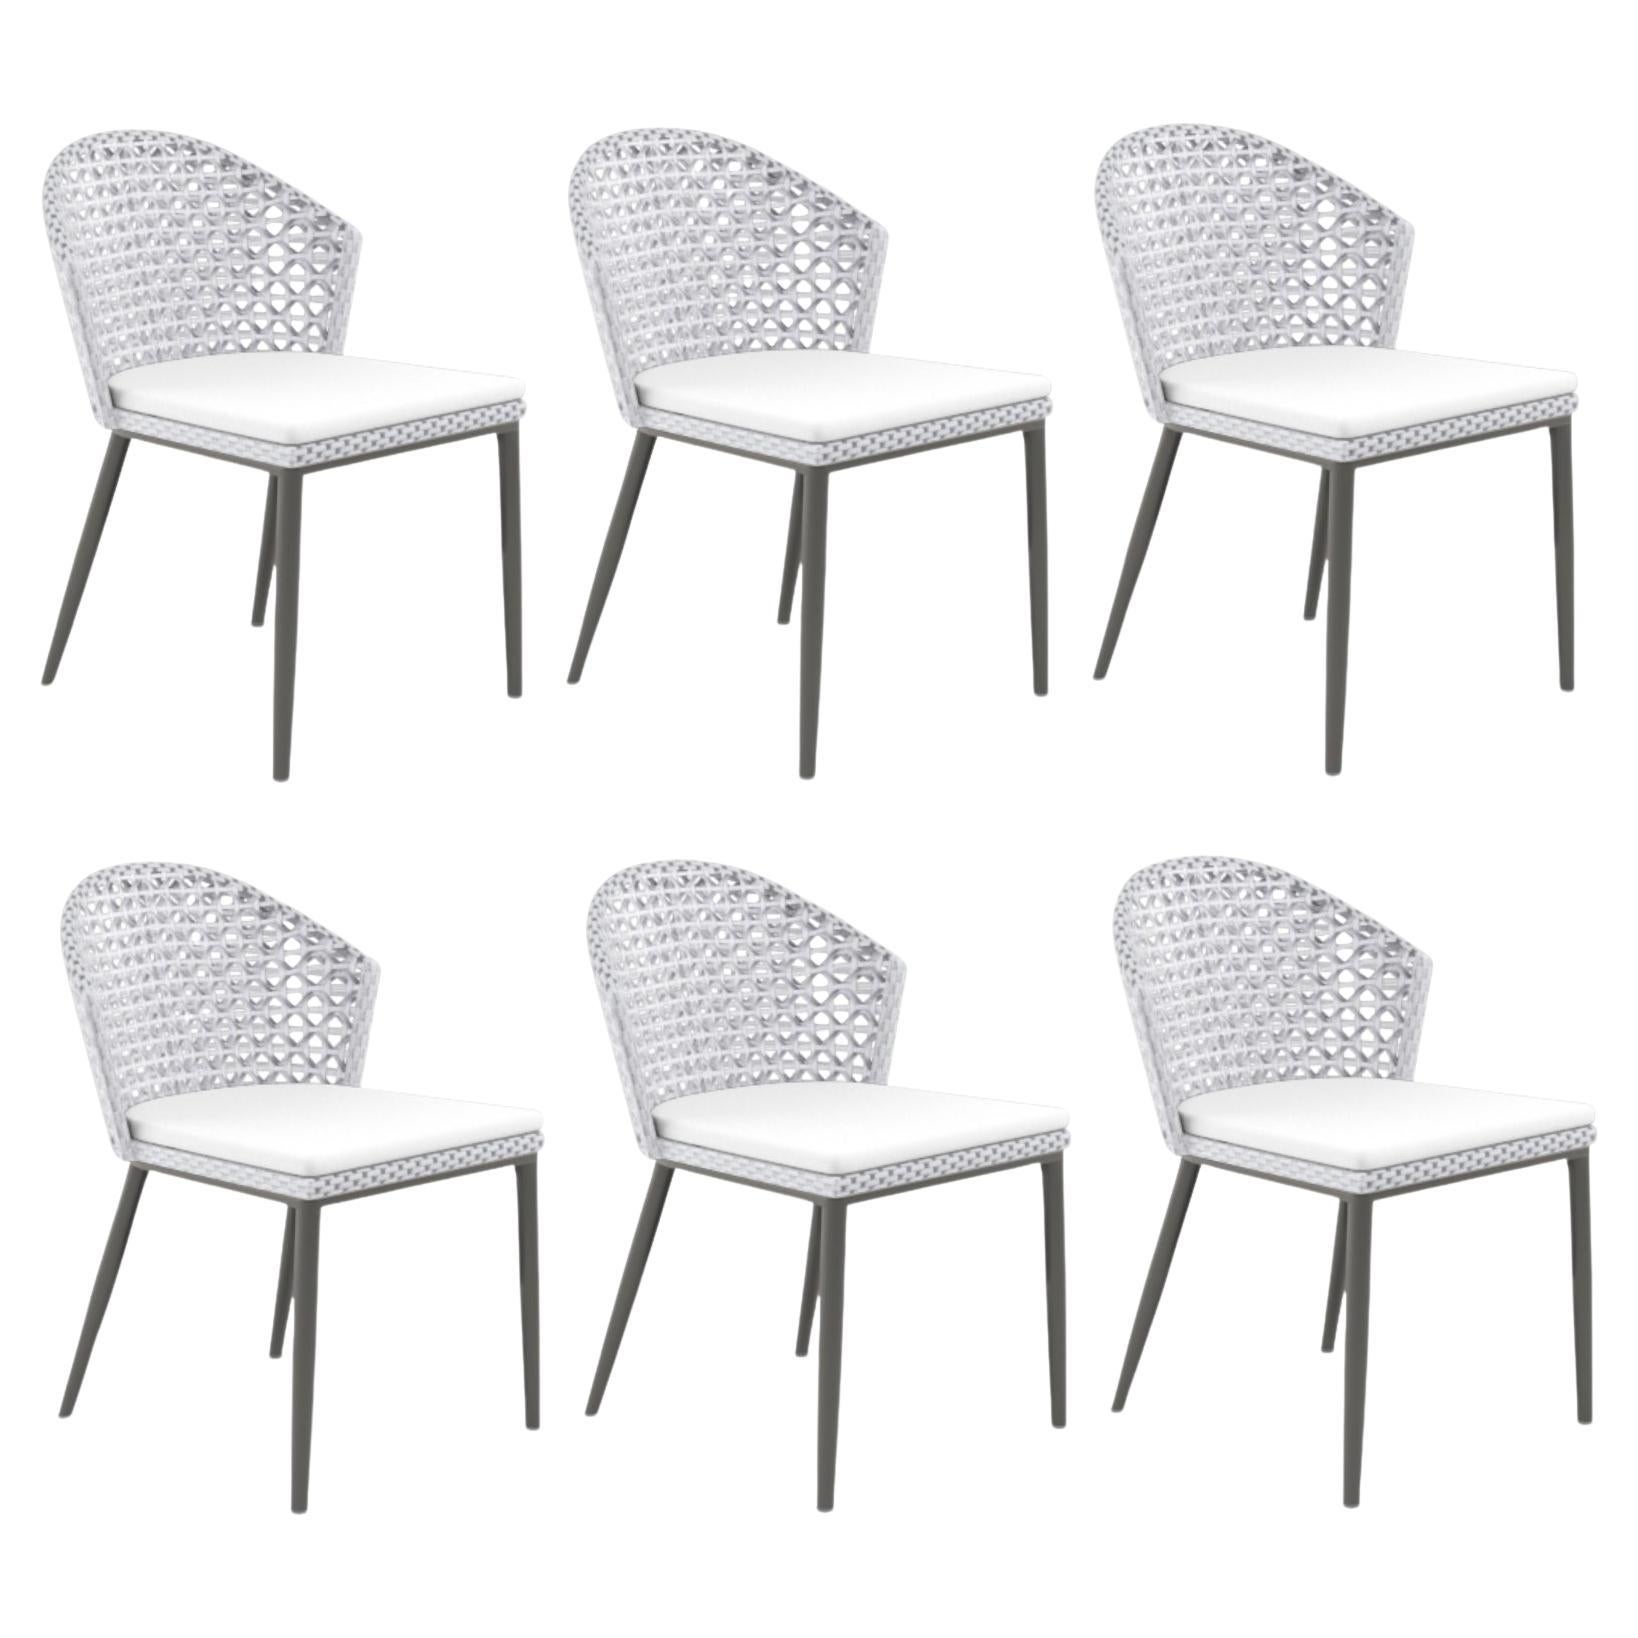 Outdoor Dining Chairs in Seashell Weather Resistant Wicker / Set of 6 For Sale